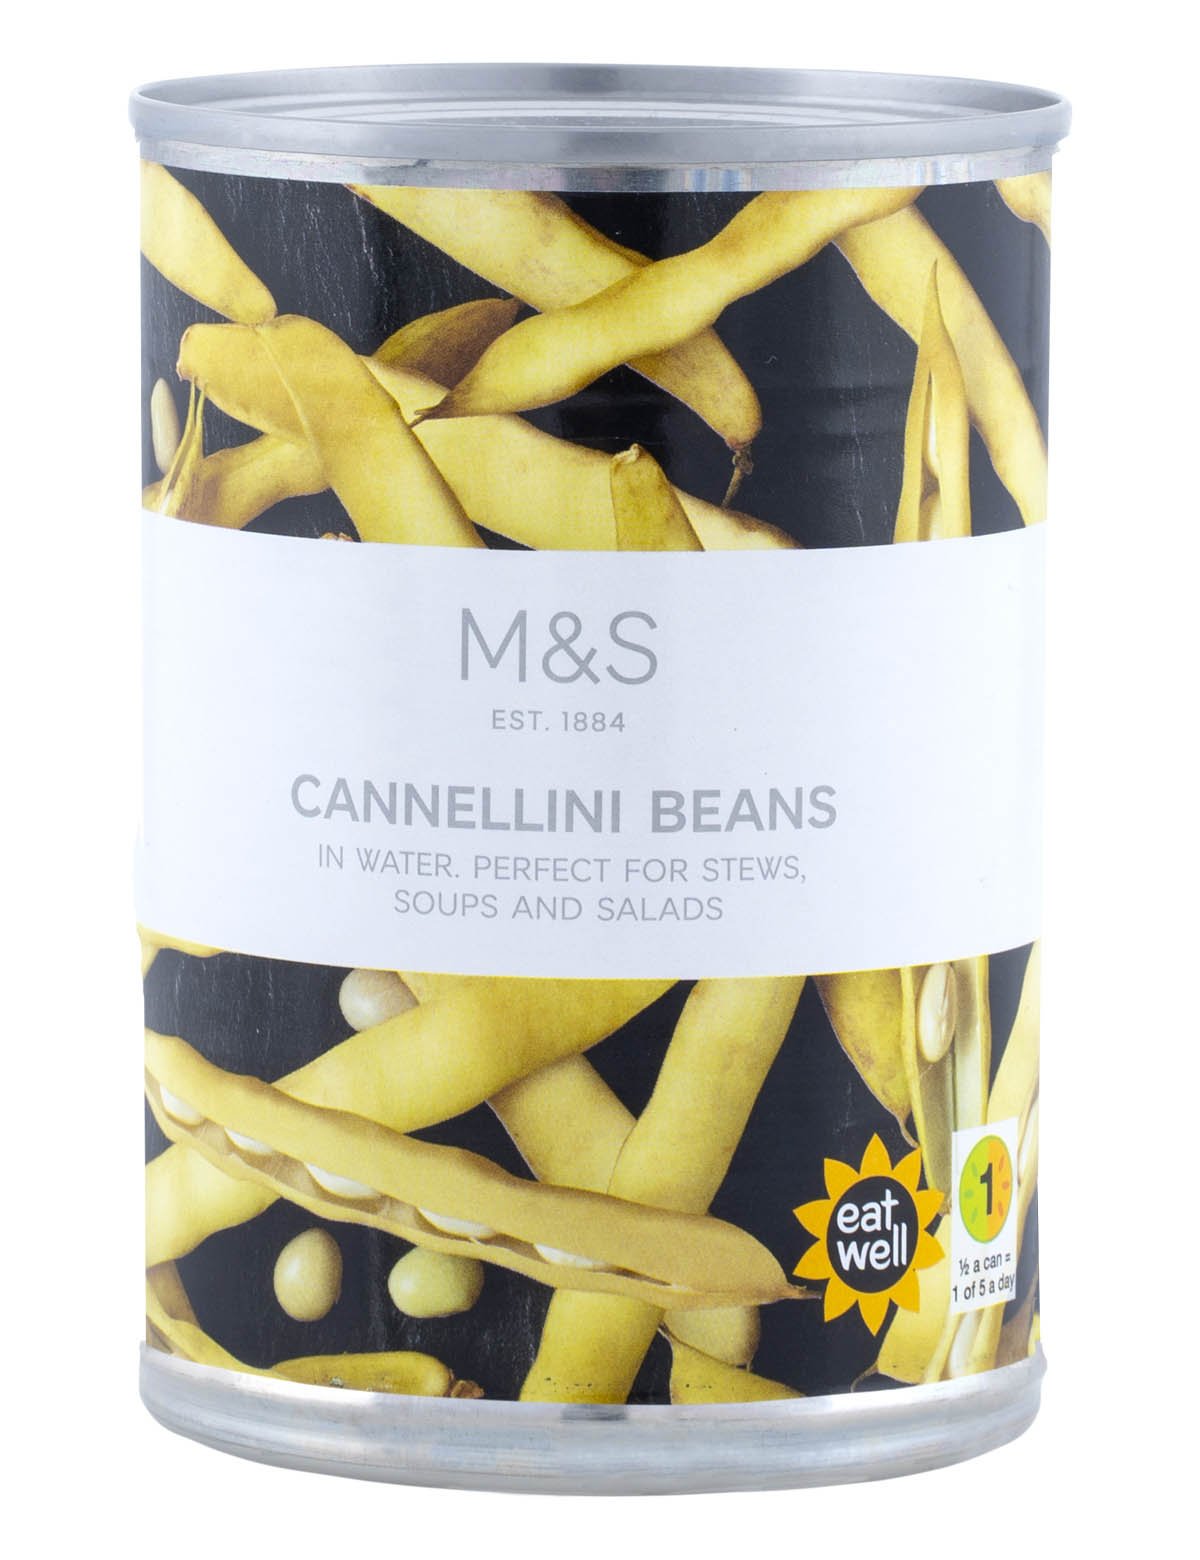 Canned Cannellini Beans.